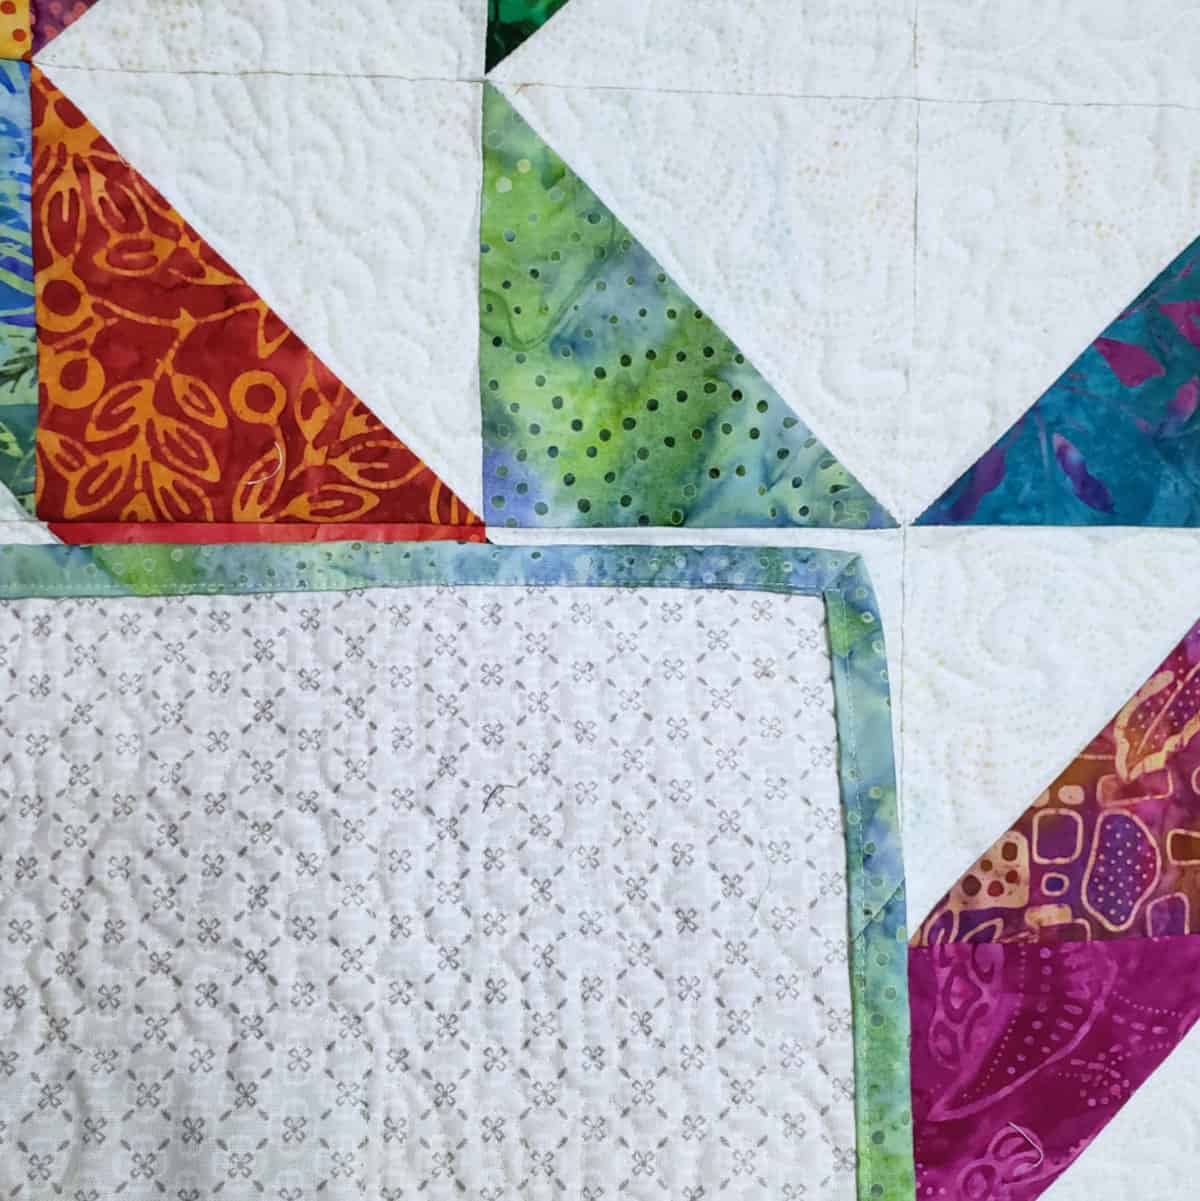 Binding on the quilt back